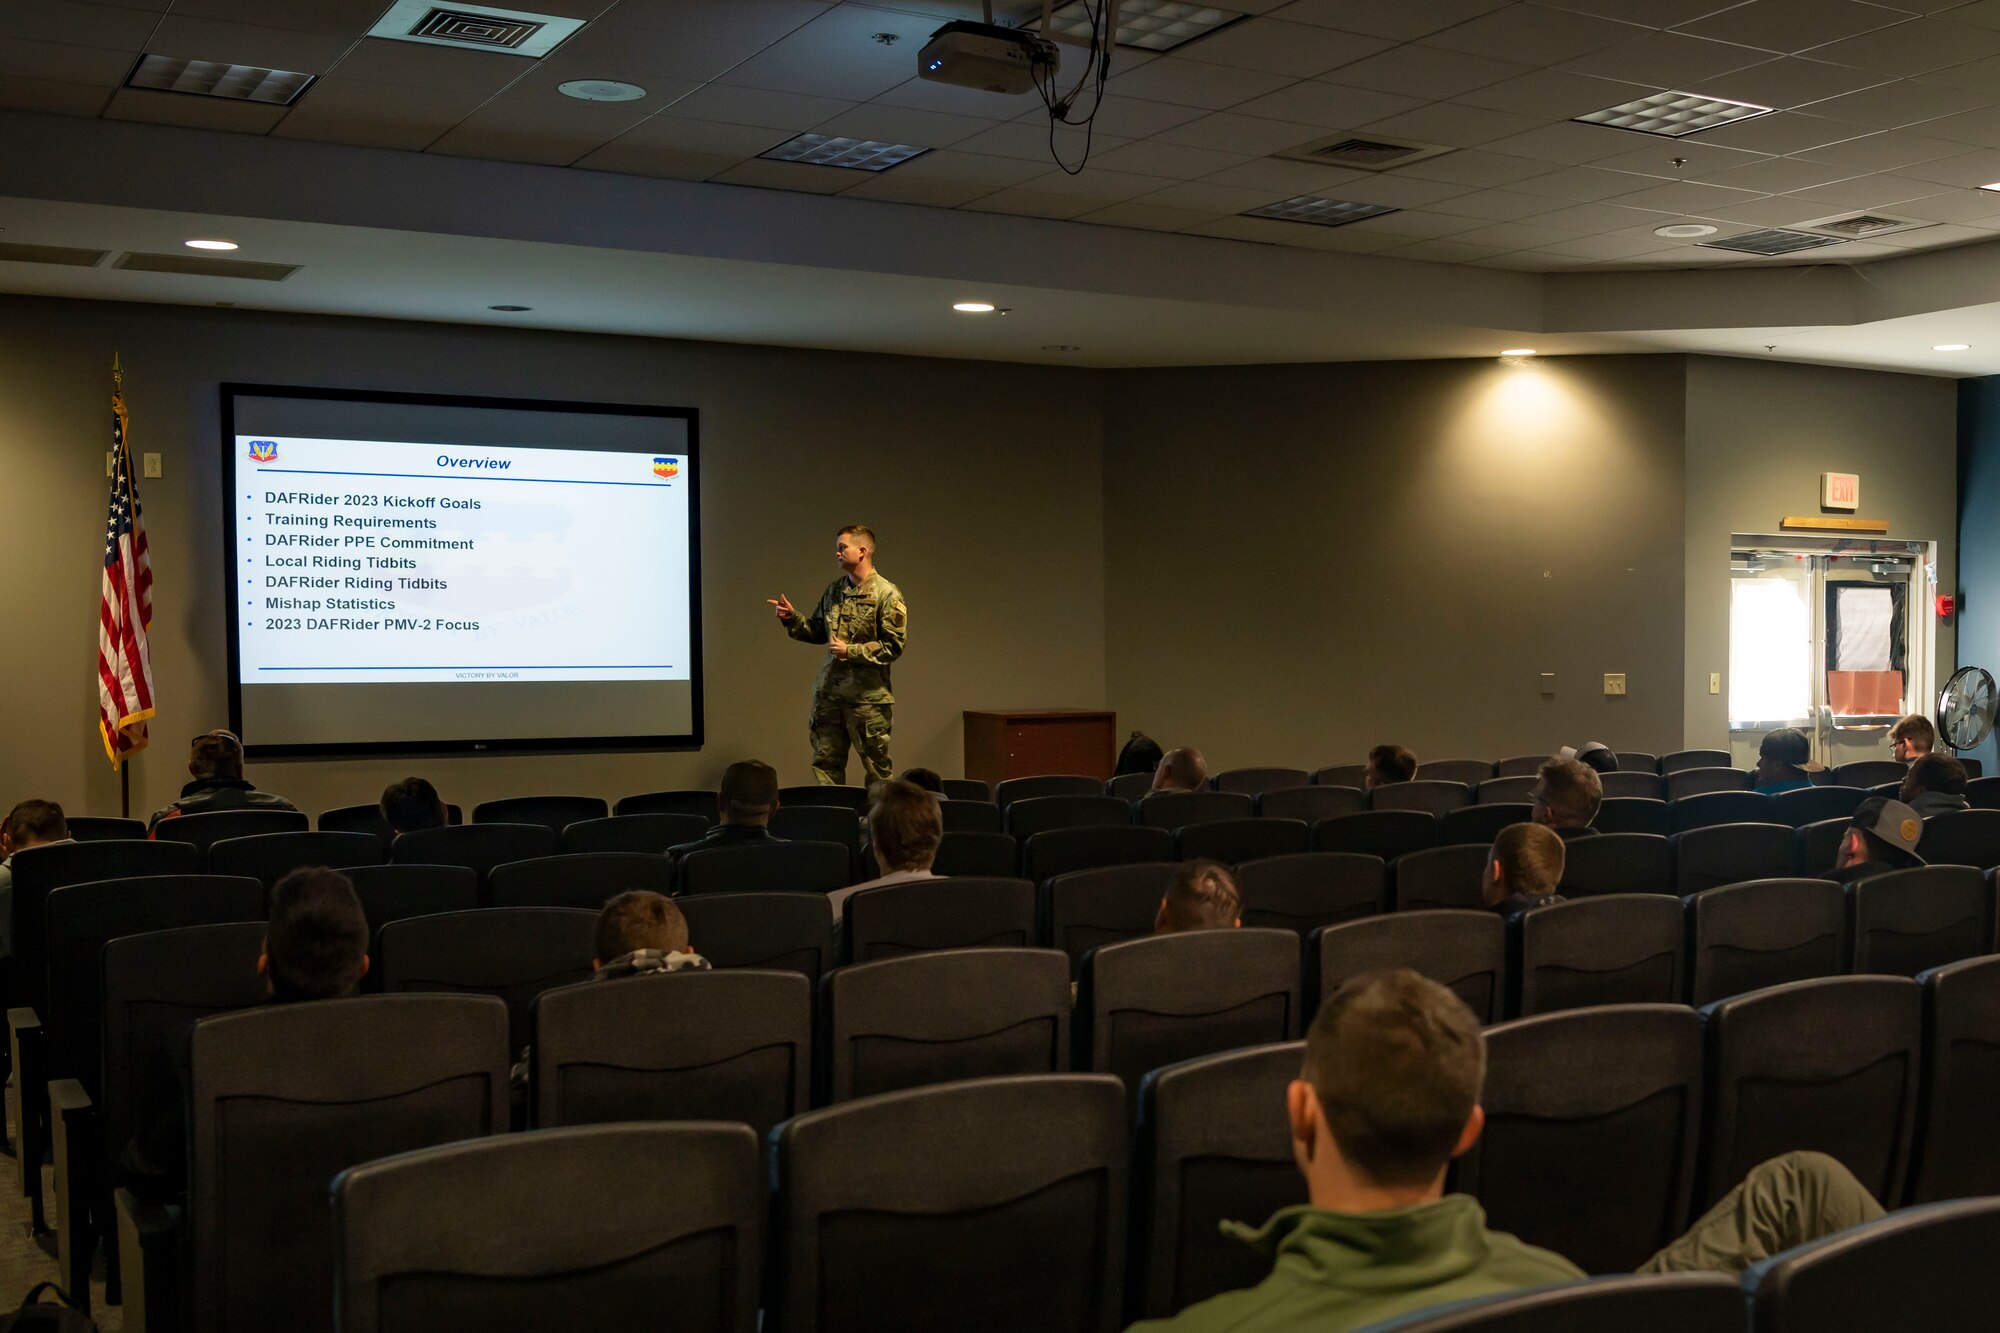 An Airman conducts a safety brief.